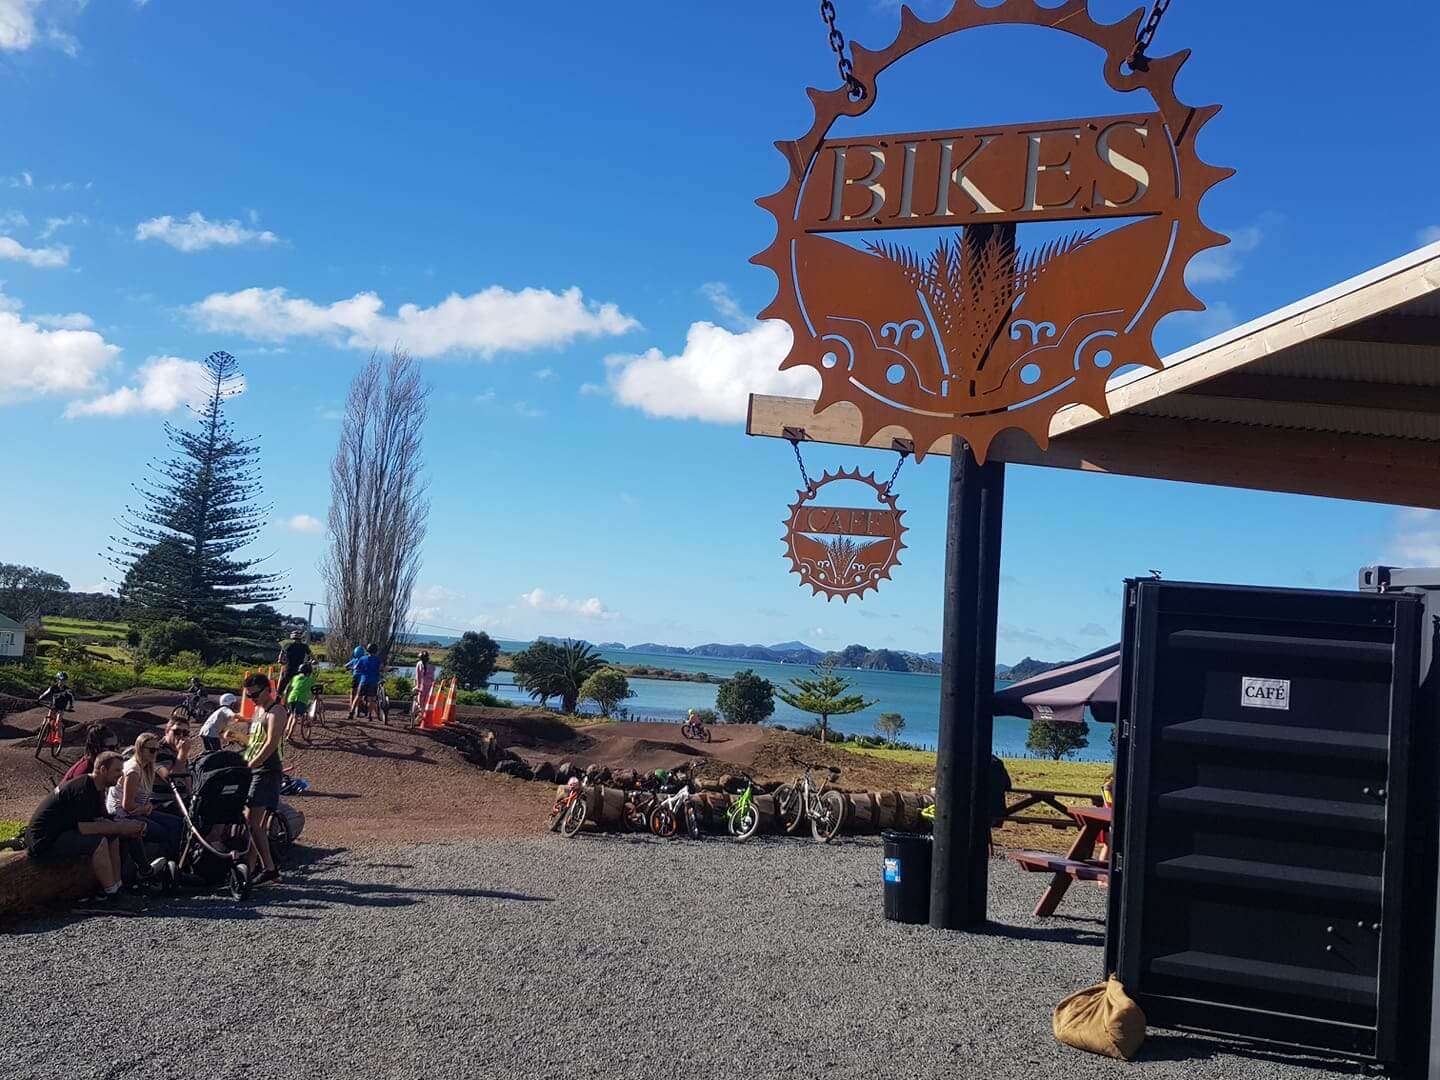 Bike park with beautiful views to sit back and have a smoothie after your ride